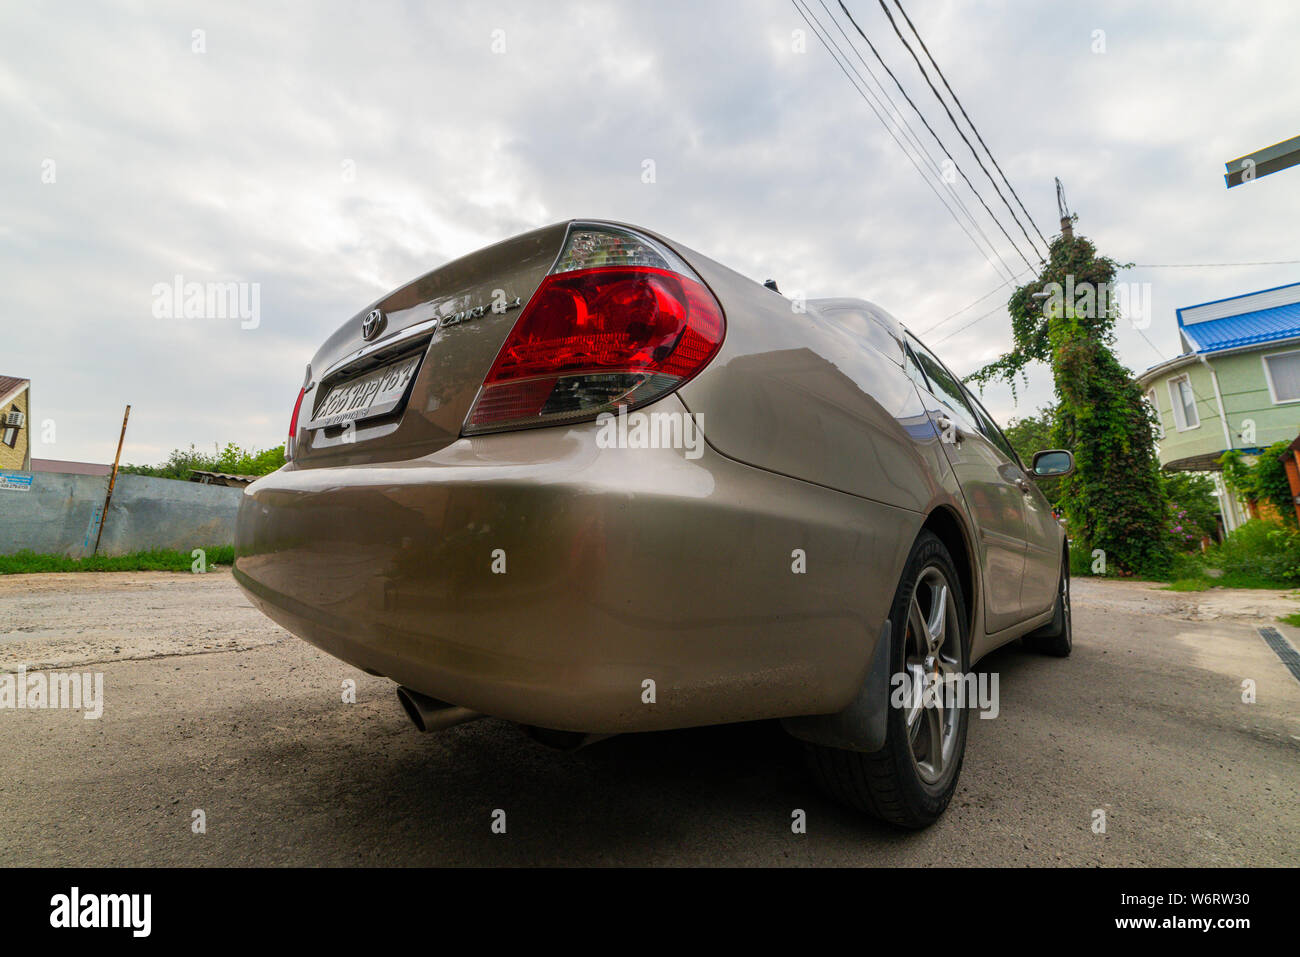 Russia, Rostov on Don, August 02, 2019. Private car Toyota Camry 30 parking parked on street near the garage. Stock Photo